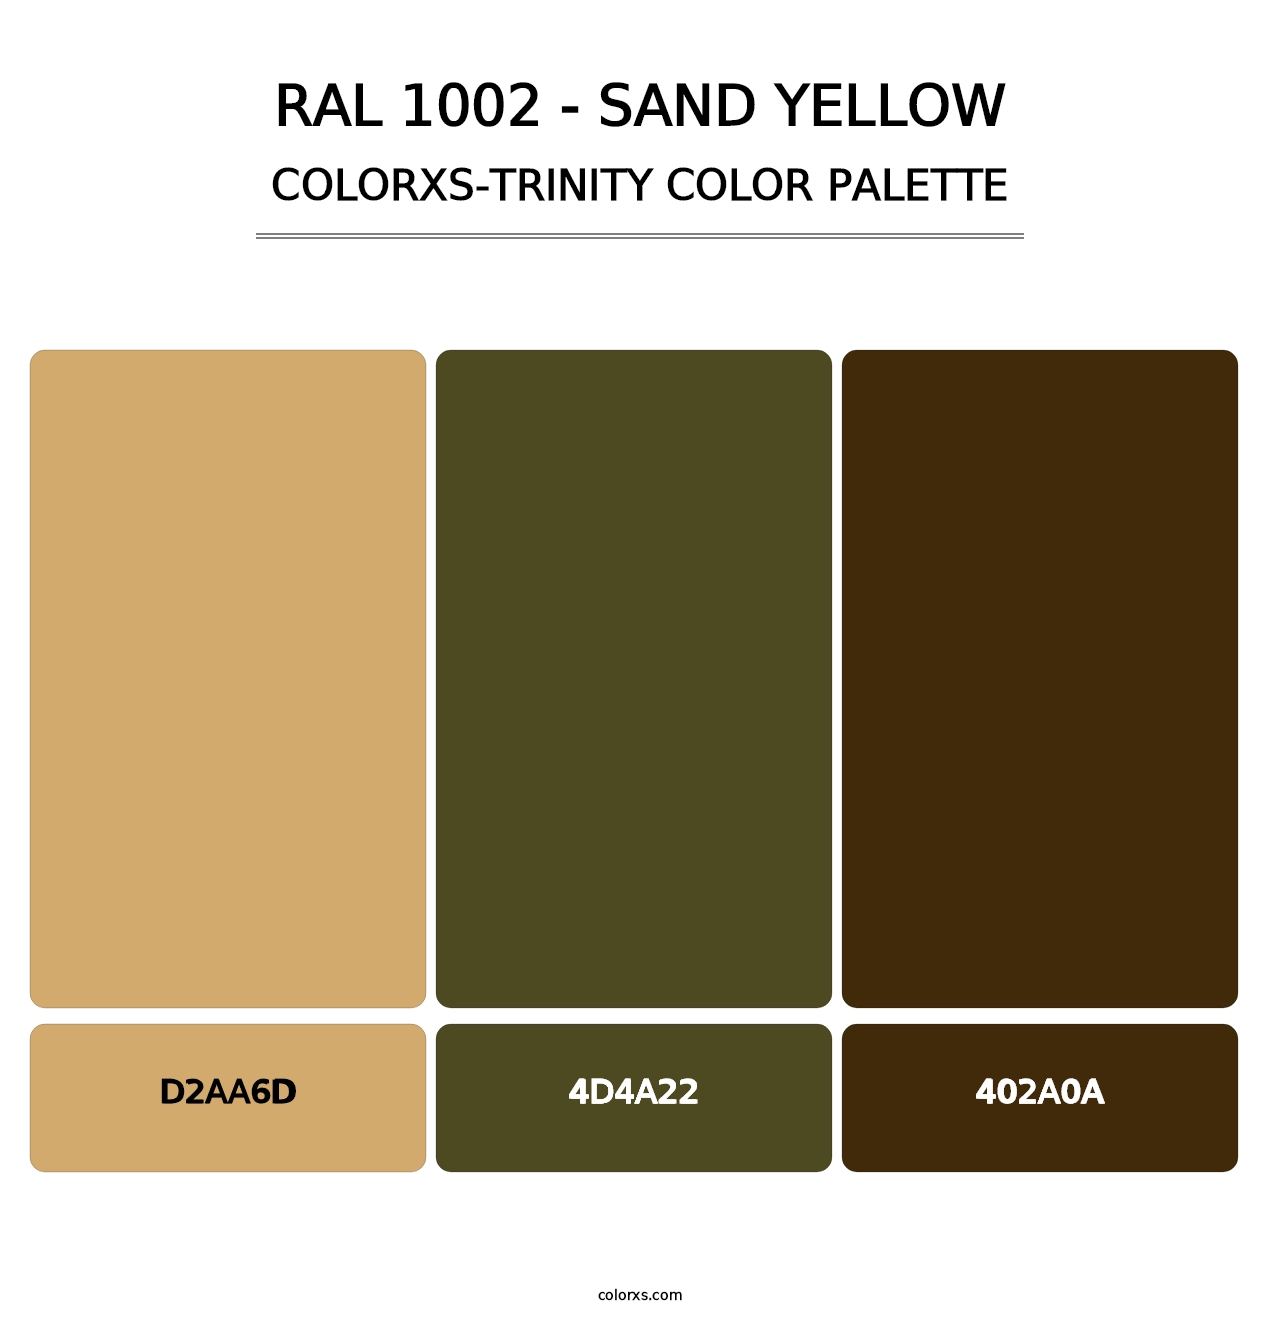 RAL 1002 - Sand Yellow - Colorxs Trinity Palette